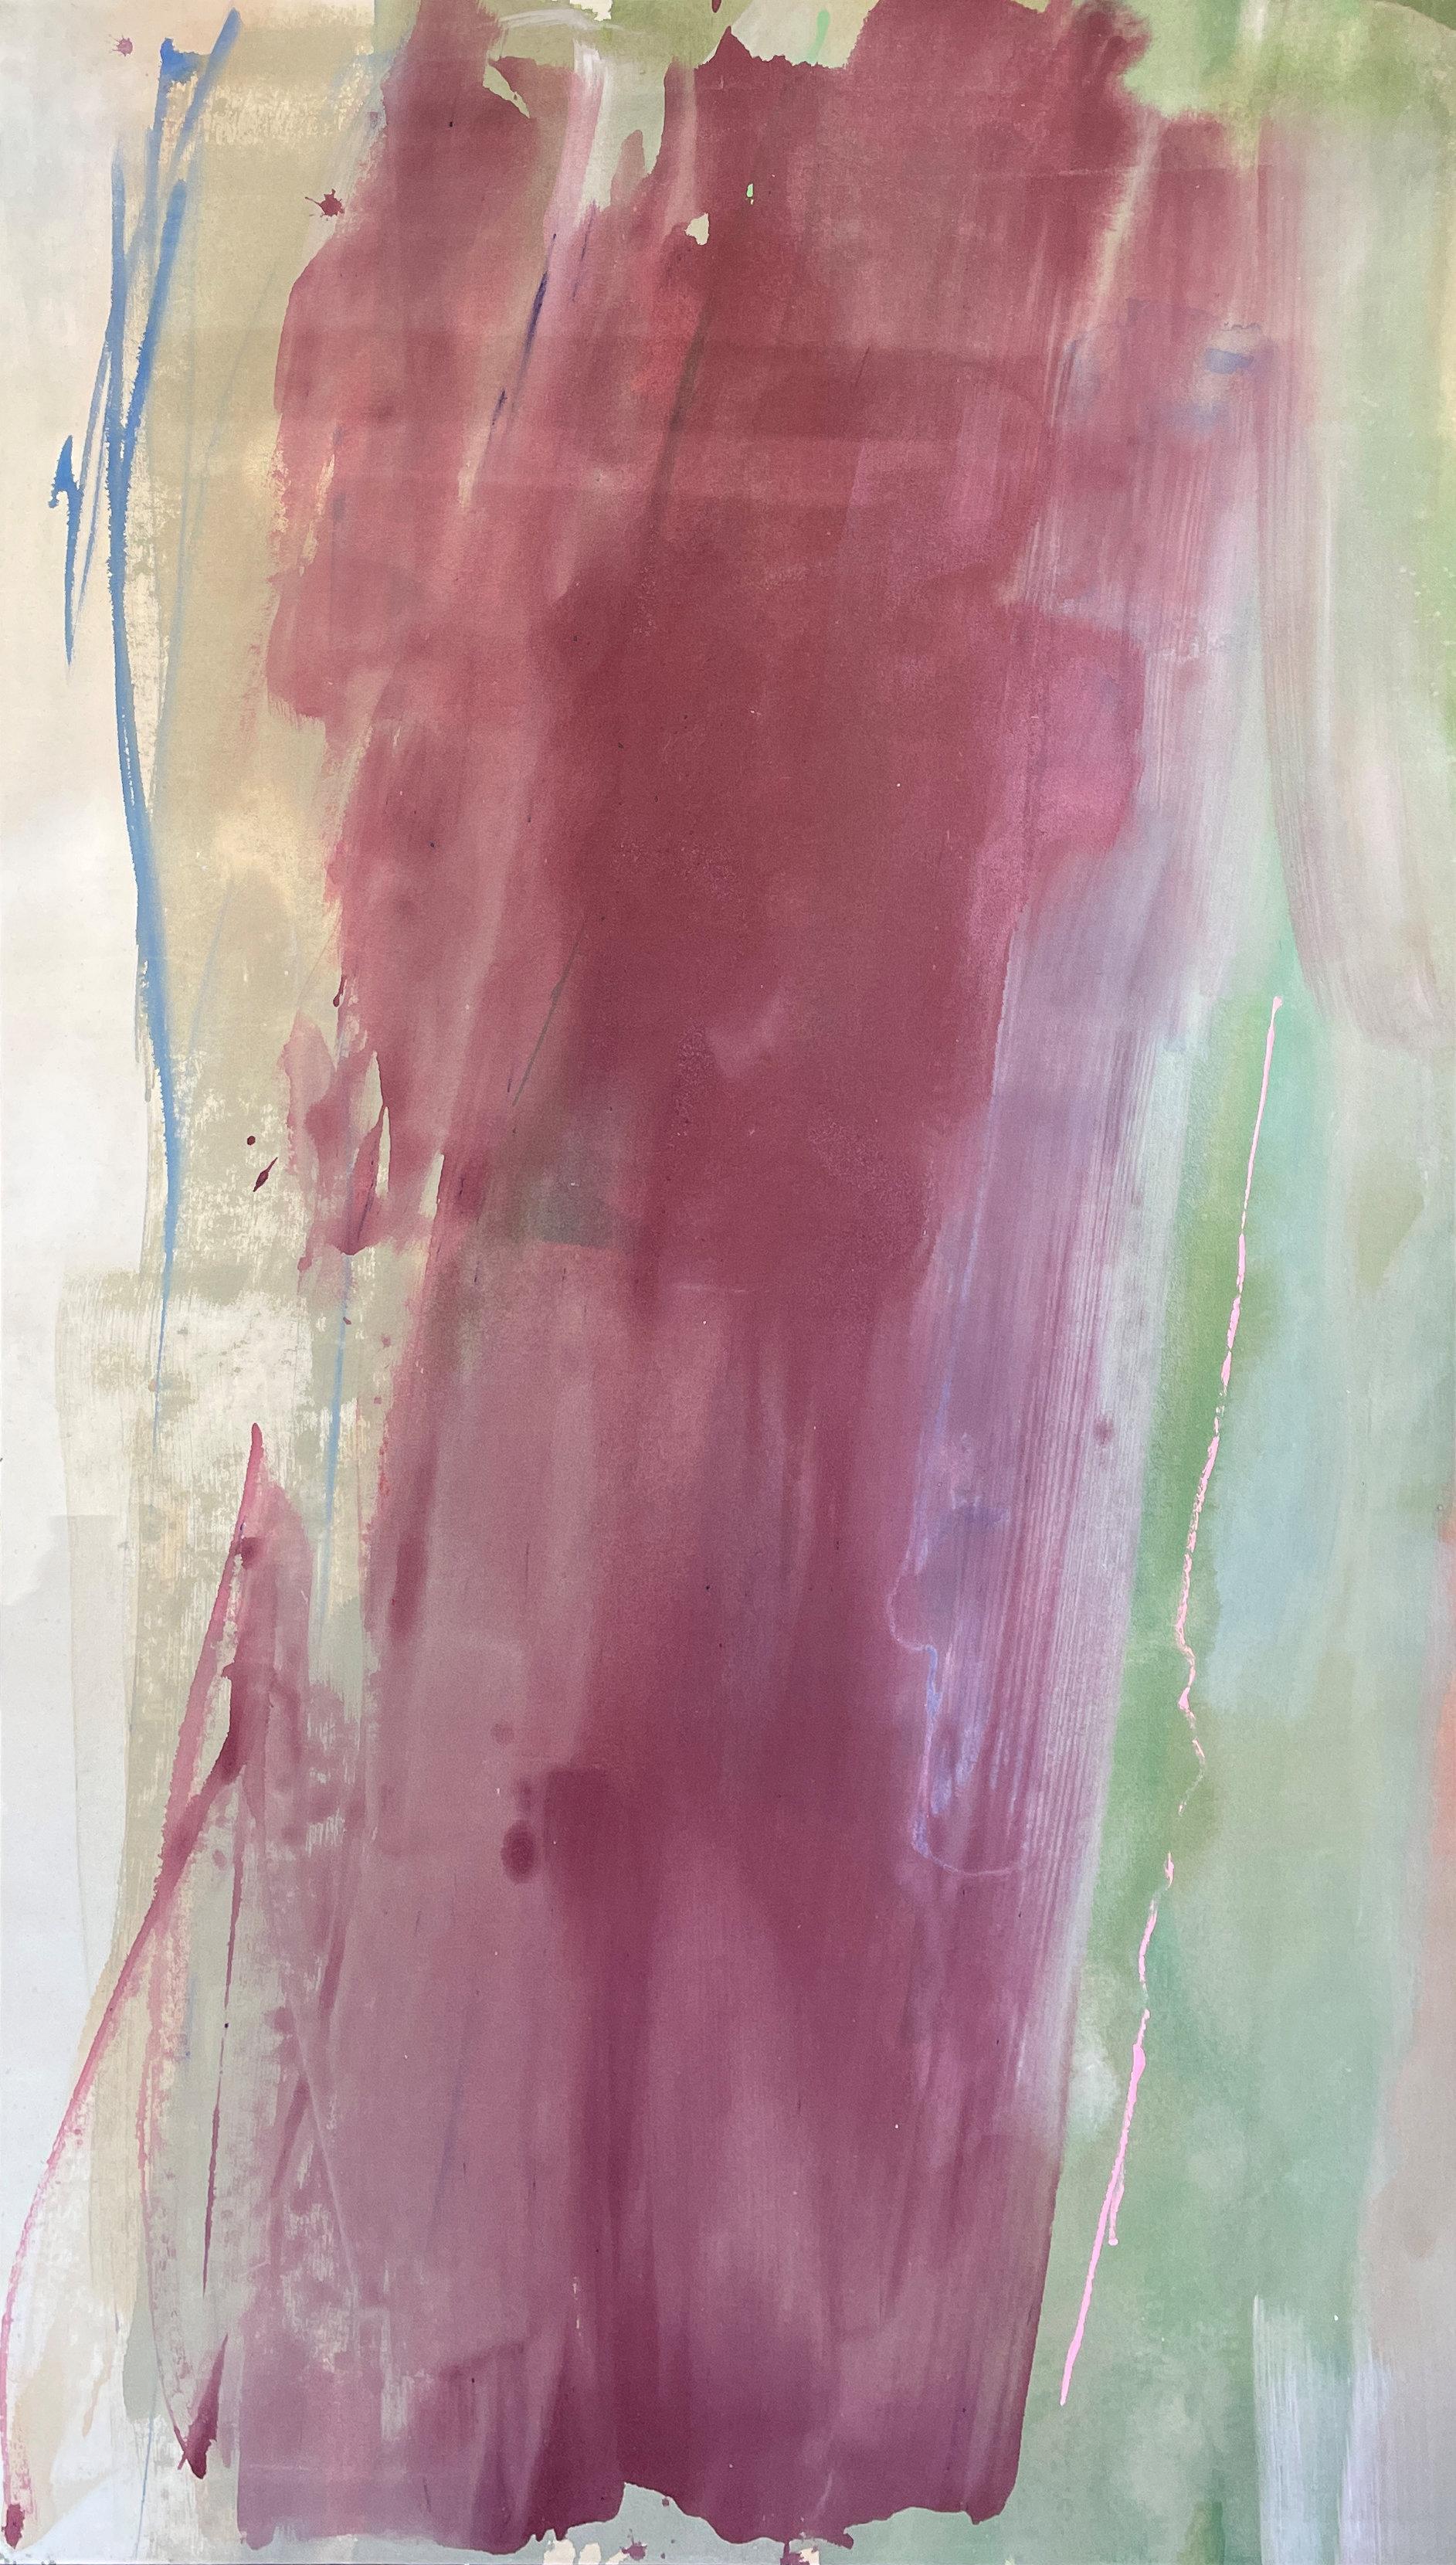 Sherron Francis
Untitled, circa 1975
Acrylic on canvas
90 x 64 inches

Artists such as Helen Frankenthaler, Morris Louis, Dan Christensen, and Sam Francis are already well-known names. However, Sherron Francis, a female artist from the Midwestern